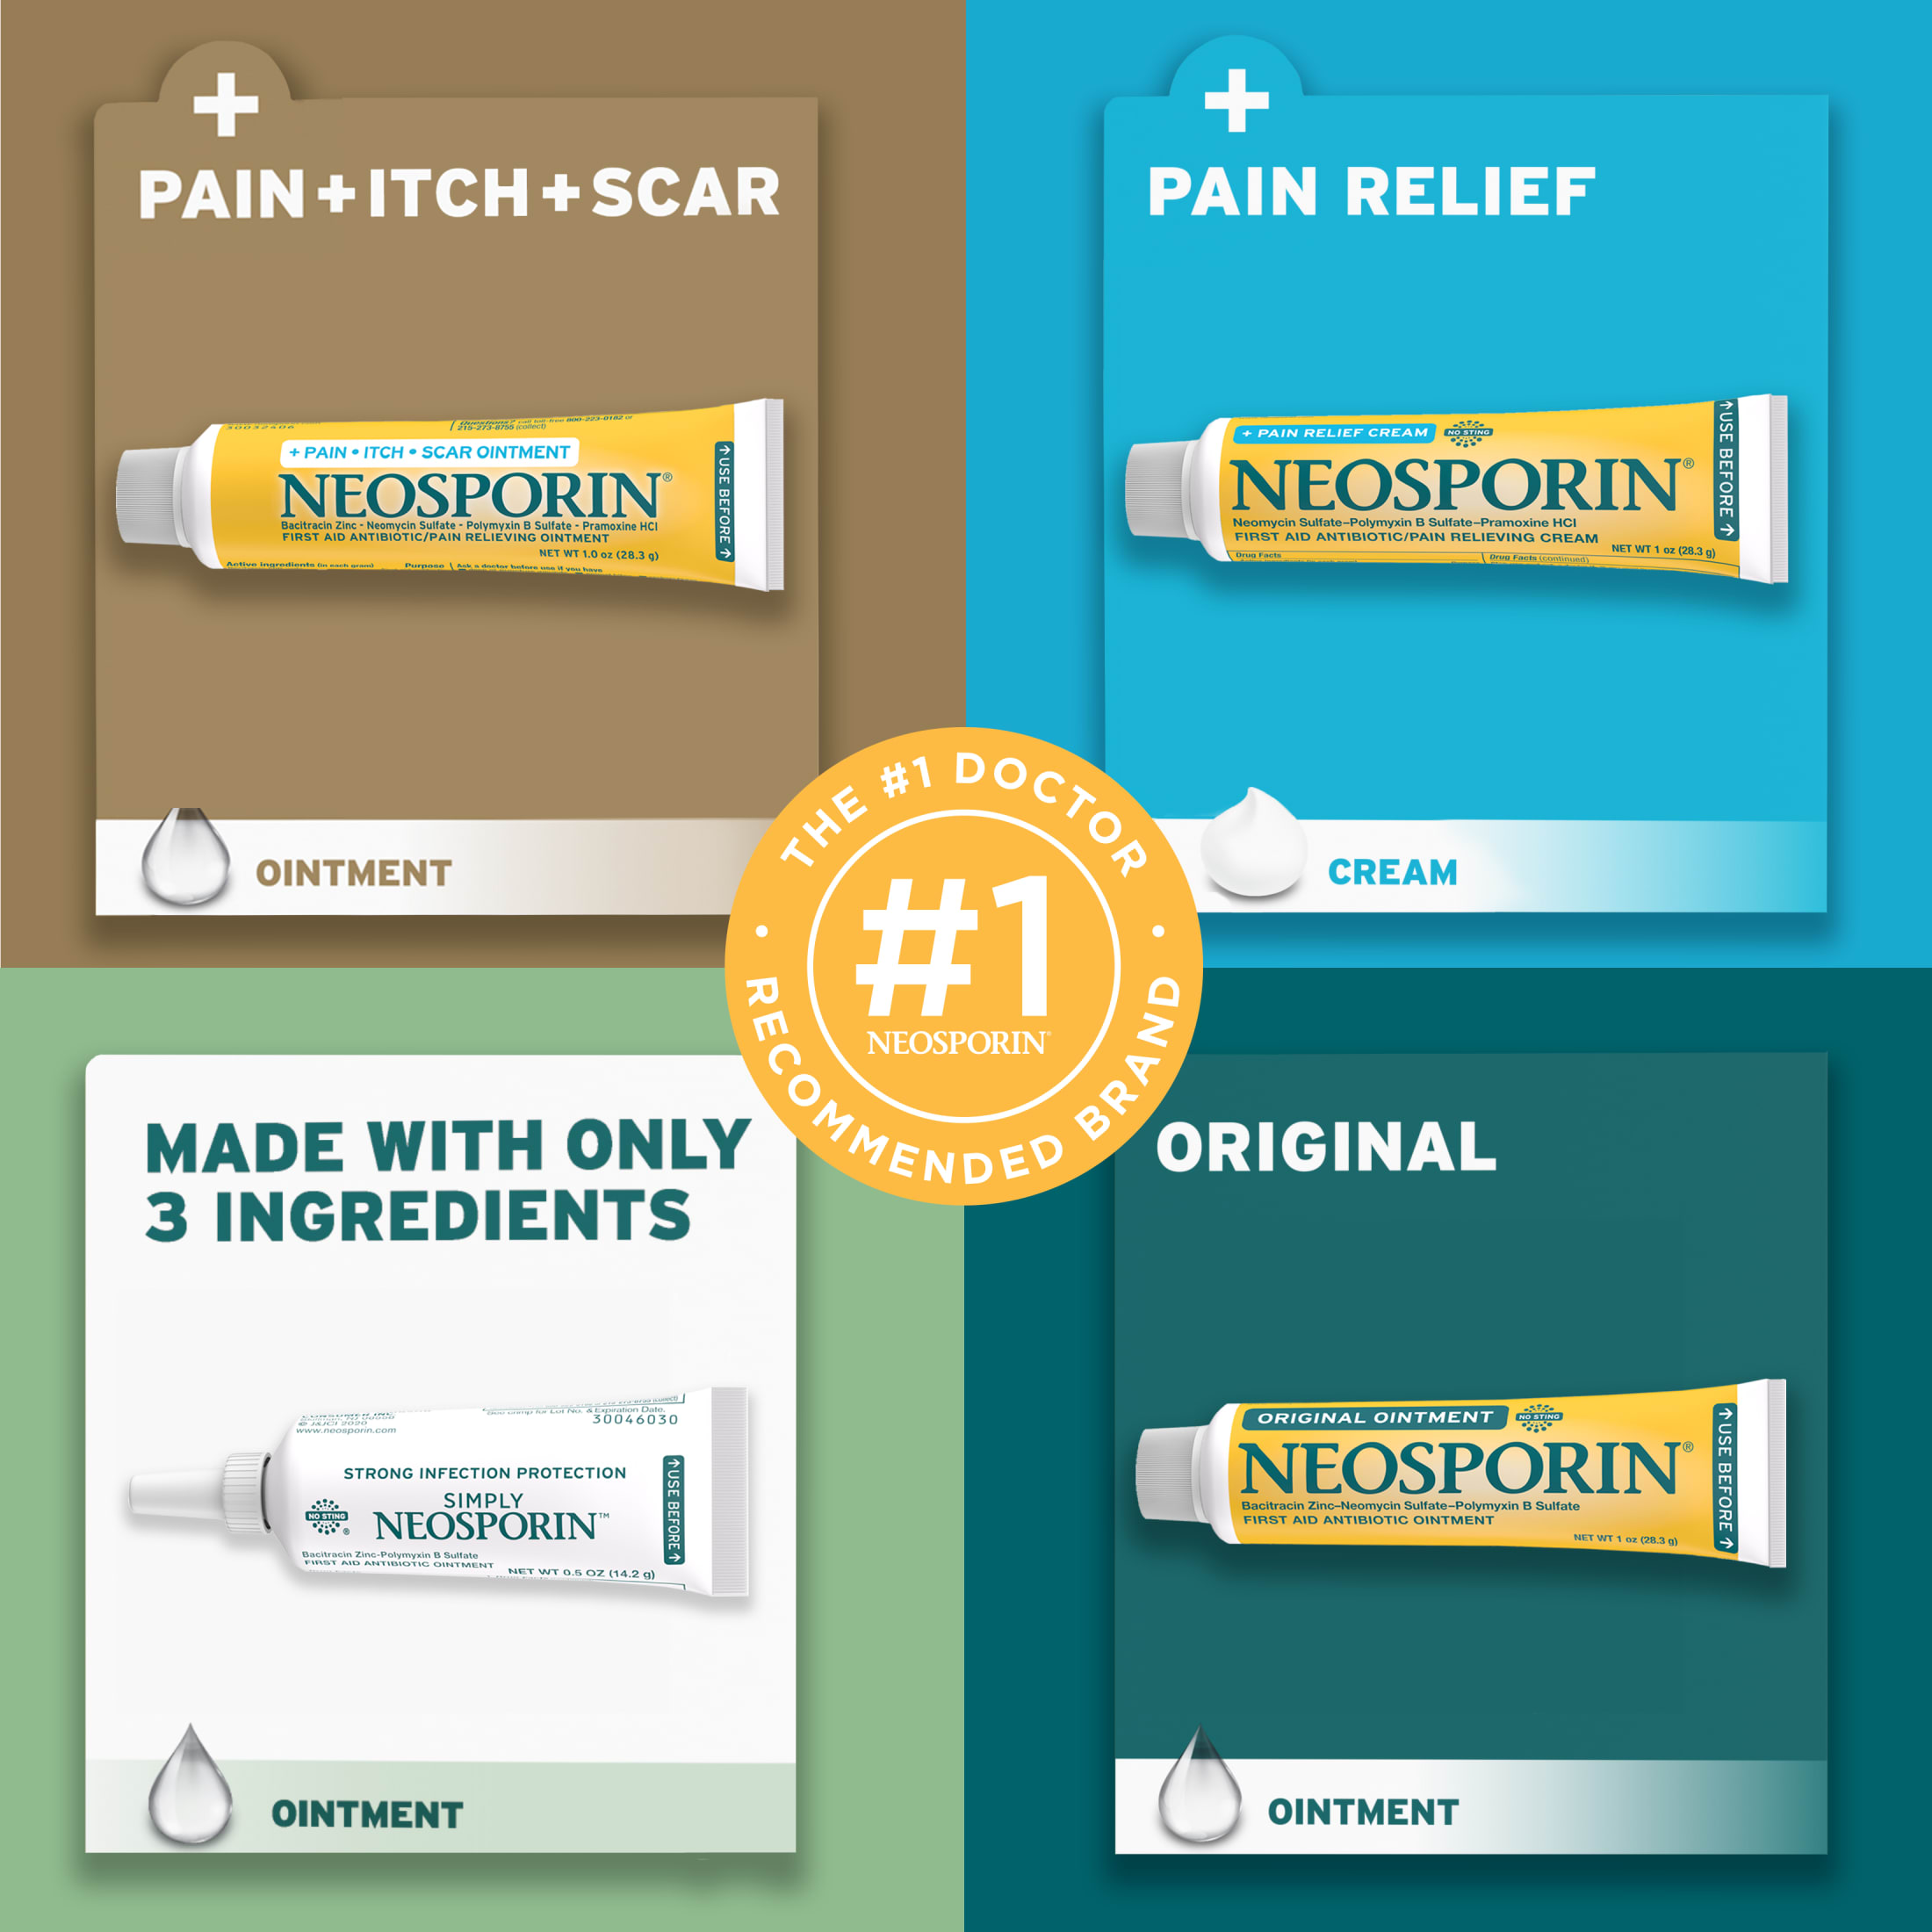 Neosporin Pain, Itch & Scar First Aid Antibiotic Ointment, 1 oz - image 4 of 16